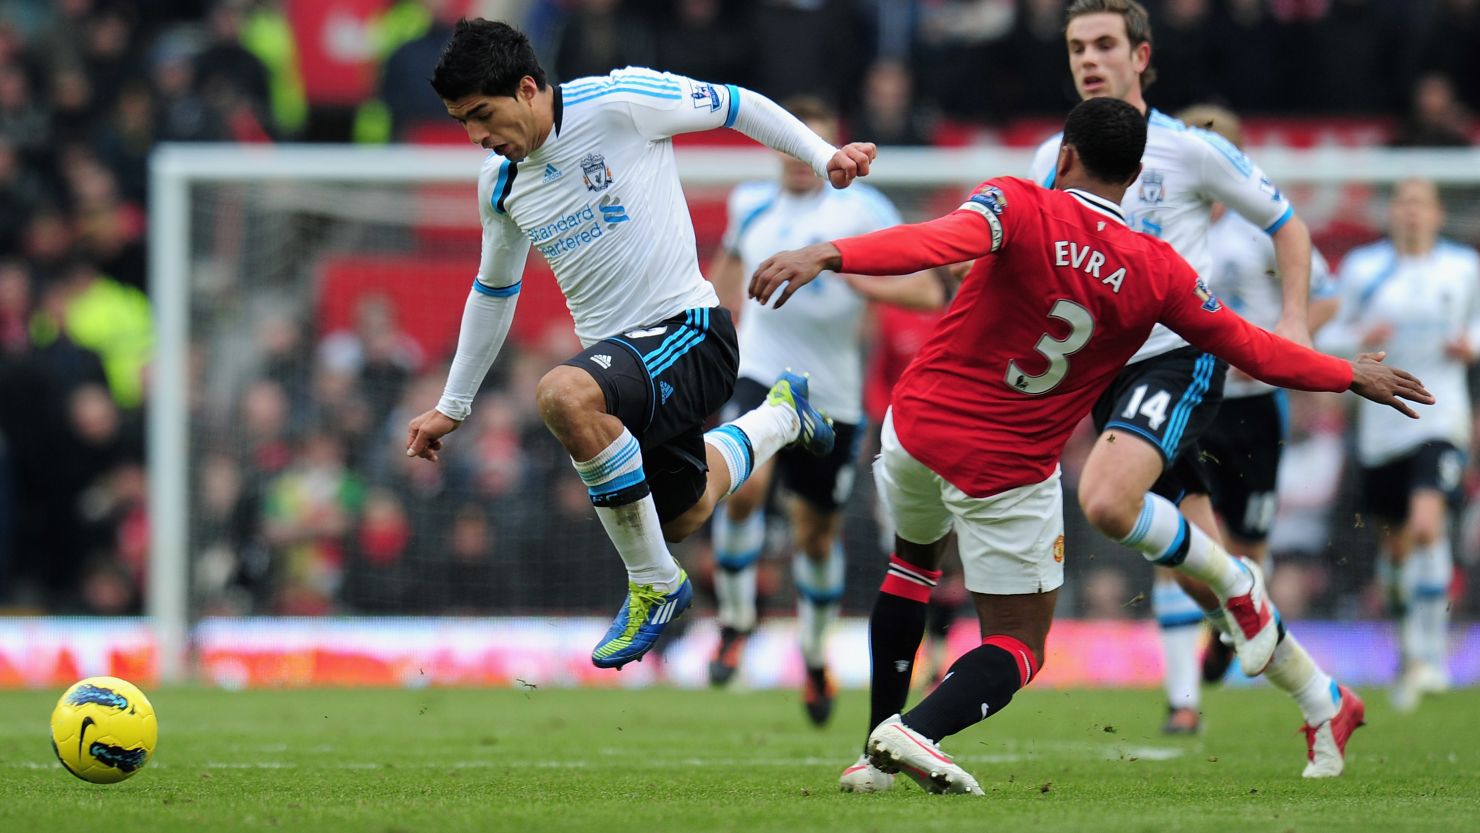 Liverpool's Luis Suarez and Man United's Patrice Evra clash on during a controversial encounter at Old Trafford on Saturday.